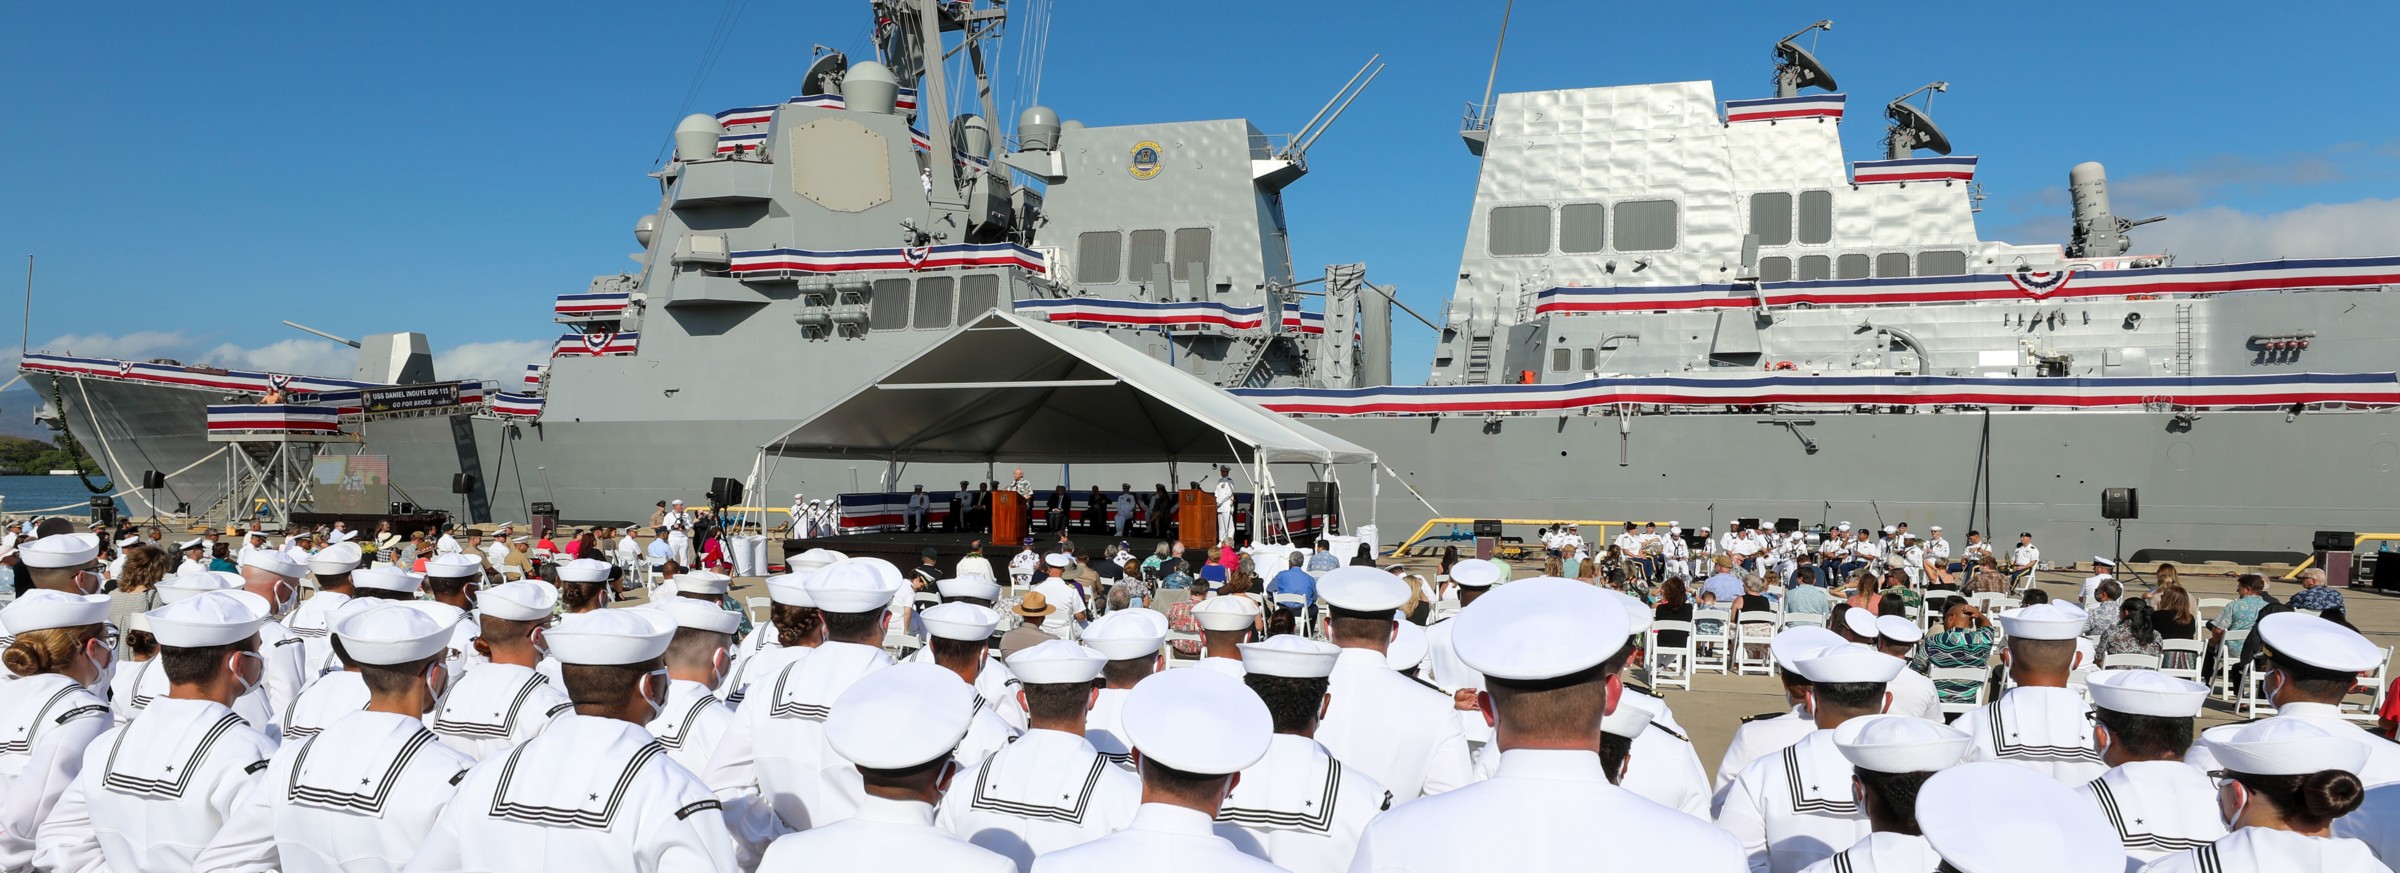 ddg-118 uss daniel inouye arleigh burke class guided missile destroyer us navy commissioning ceremony joint base pearl harbor hickam hawaii 32